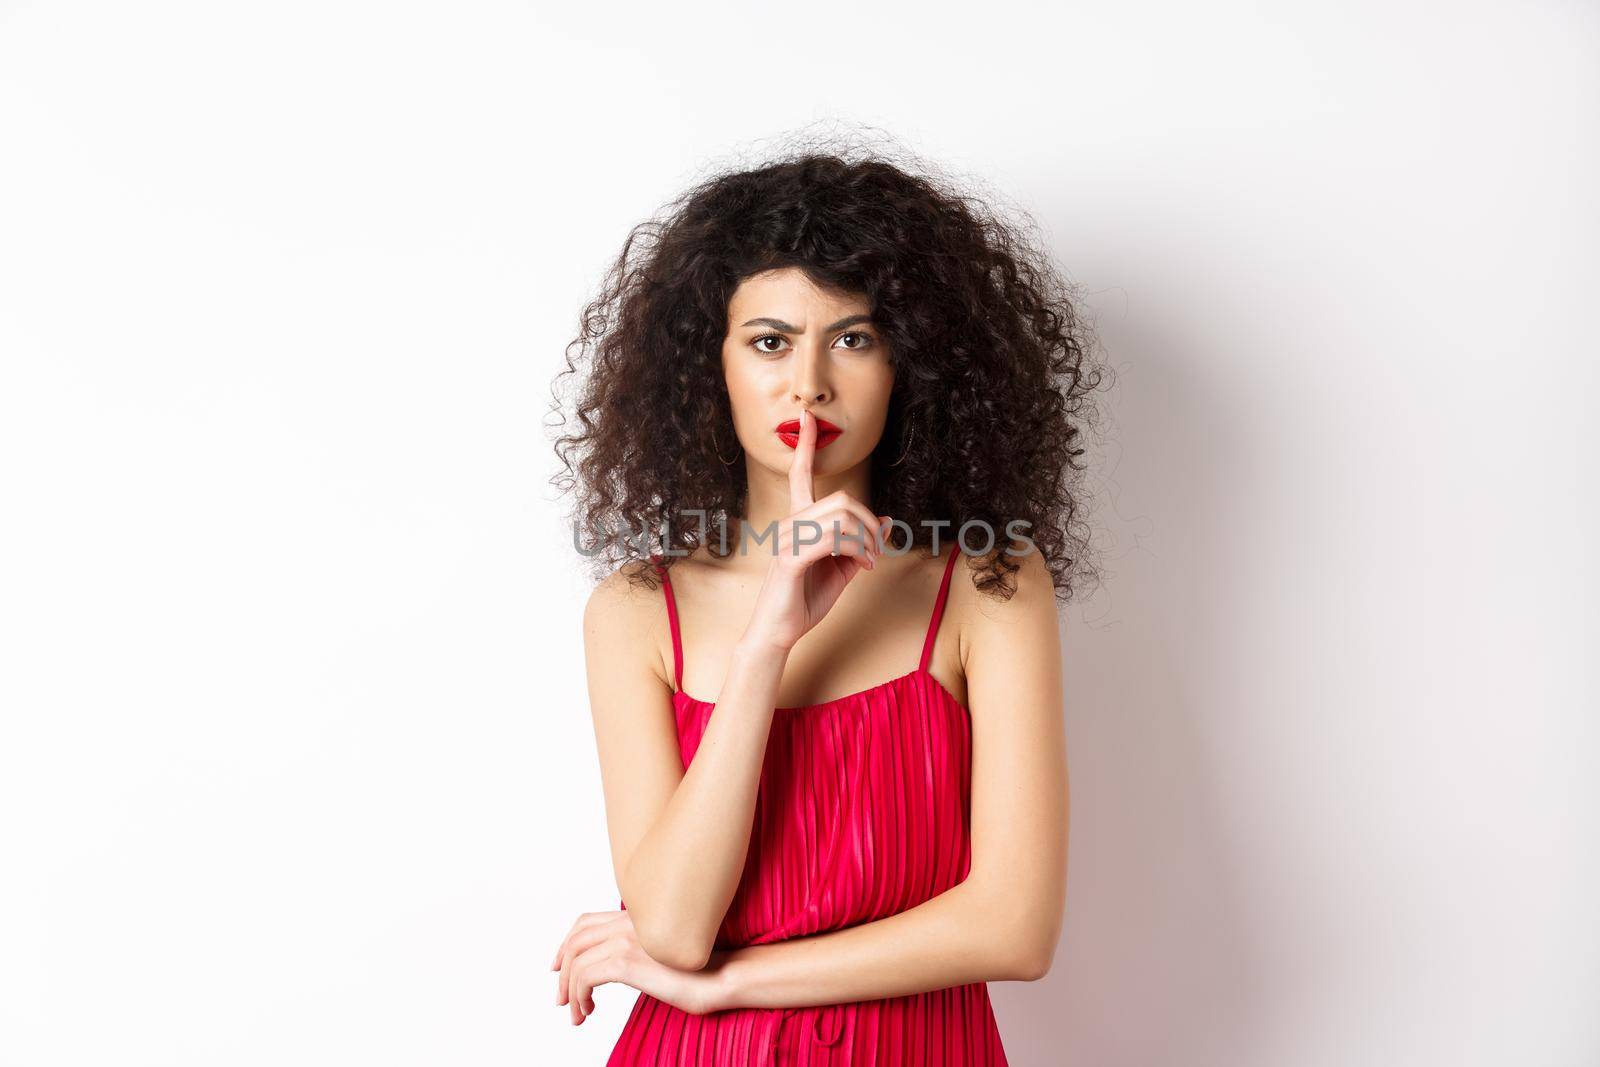 Angry elegant woman in red dress hushing and frowning, tell to be quiet, asking for silence, standing over white background.